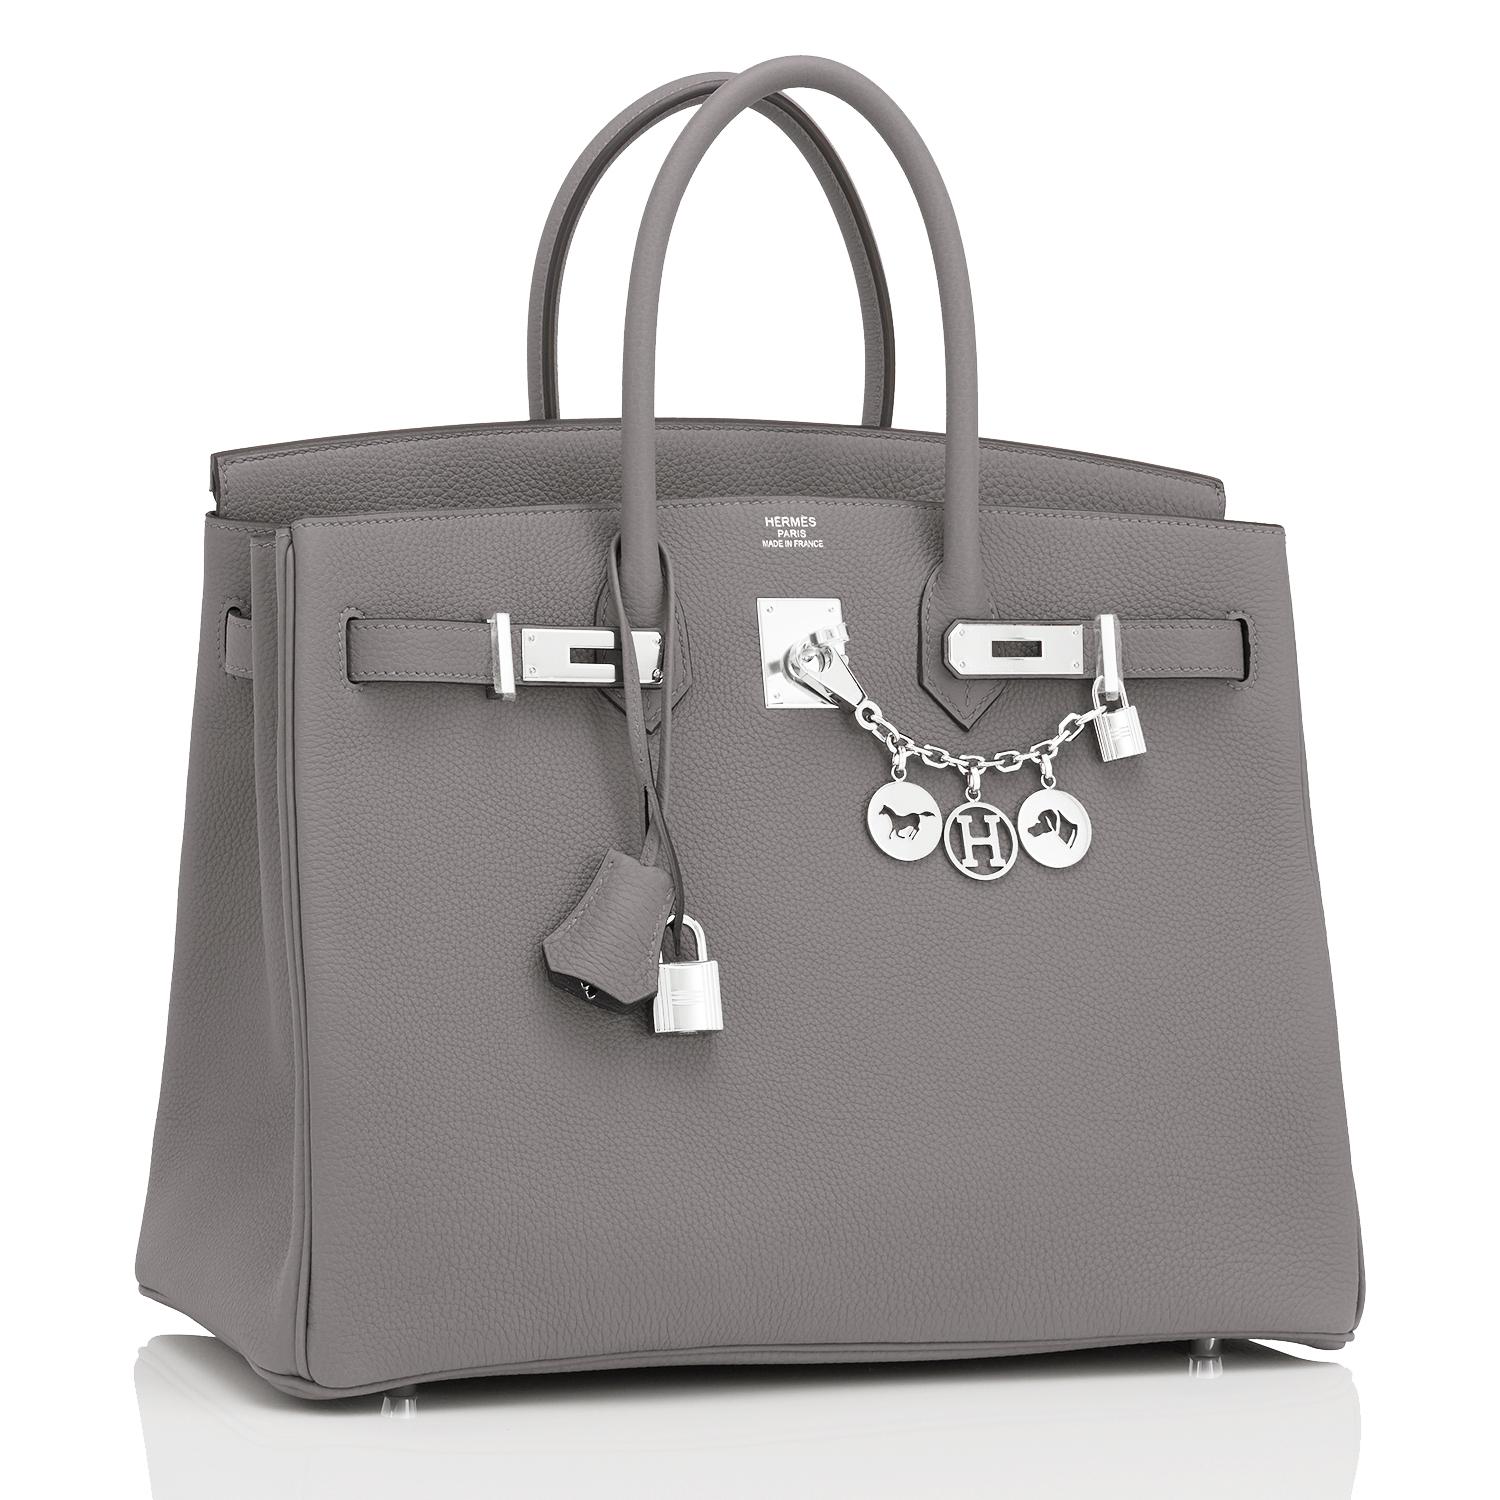 Hermes Birkin 35cm Gris Meyer Togo Grey Palladium Hardware Bag U Stamp, 2022
Brand New in Box.  Store Fresh. Pristine condition (with plastic on hardware).
Just purchased from Hermes store, bag bears new 2022 interior U Stamp.
Perfect gift! Comes